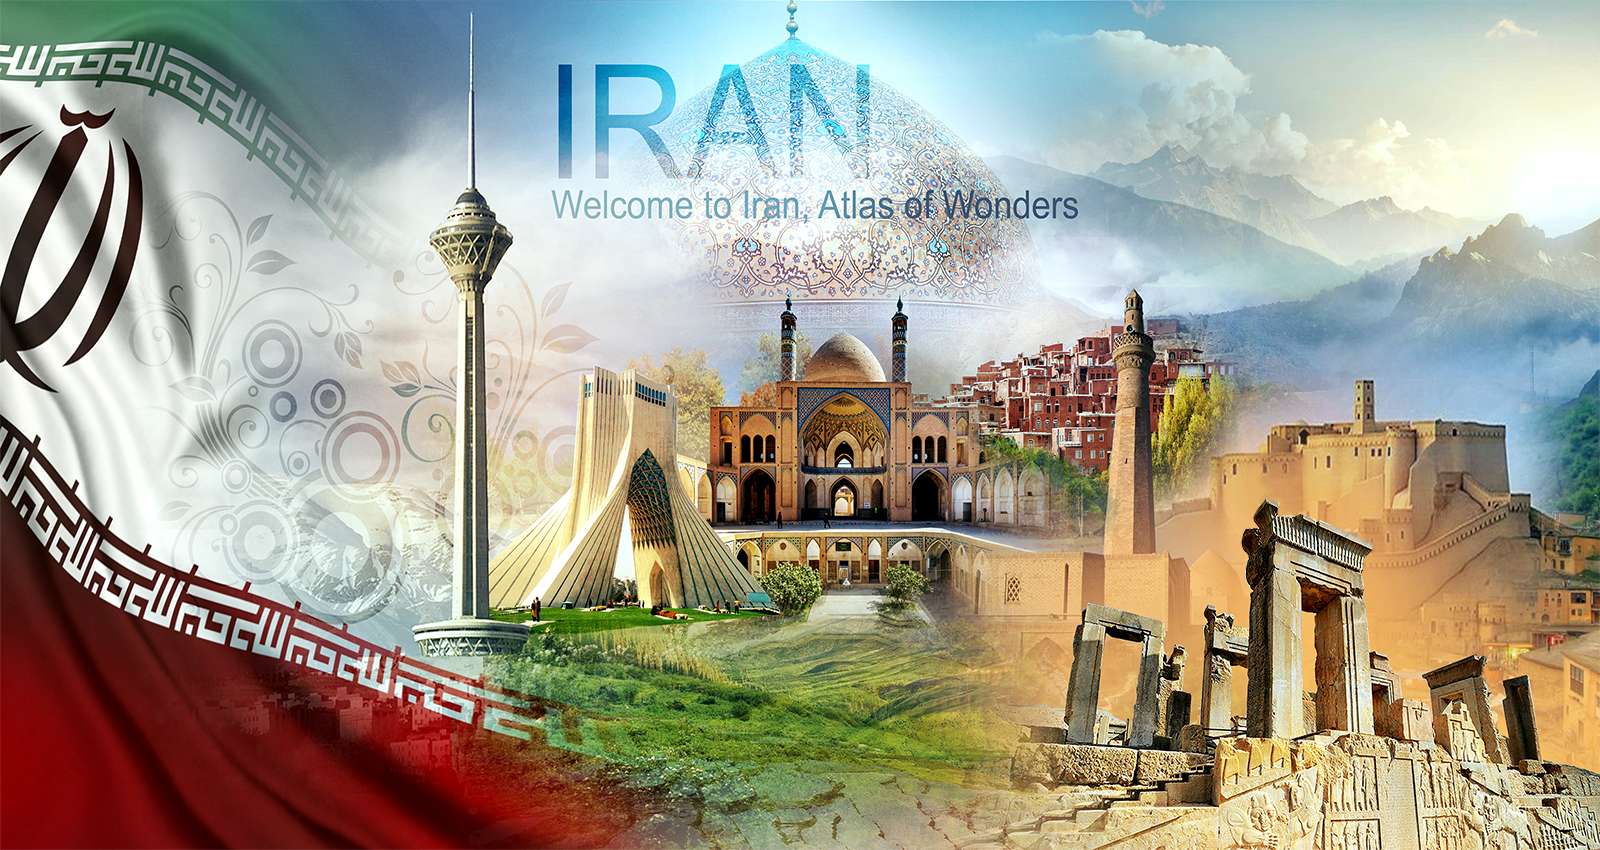 WELCOME TO IRAN